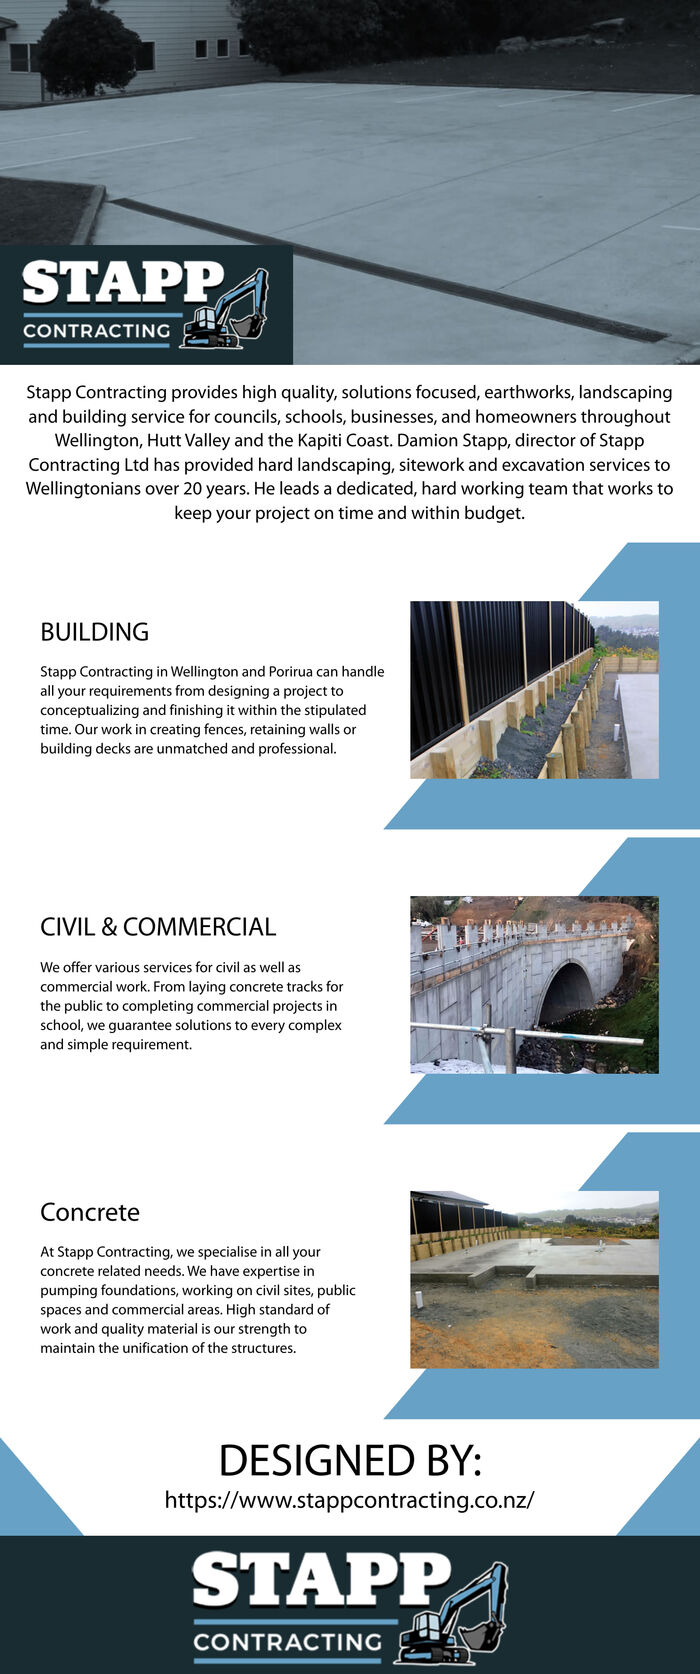 This infographic is designed by Stapp Contracting.